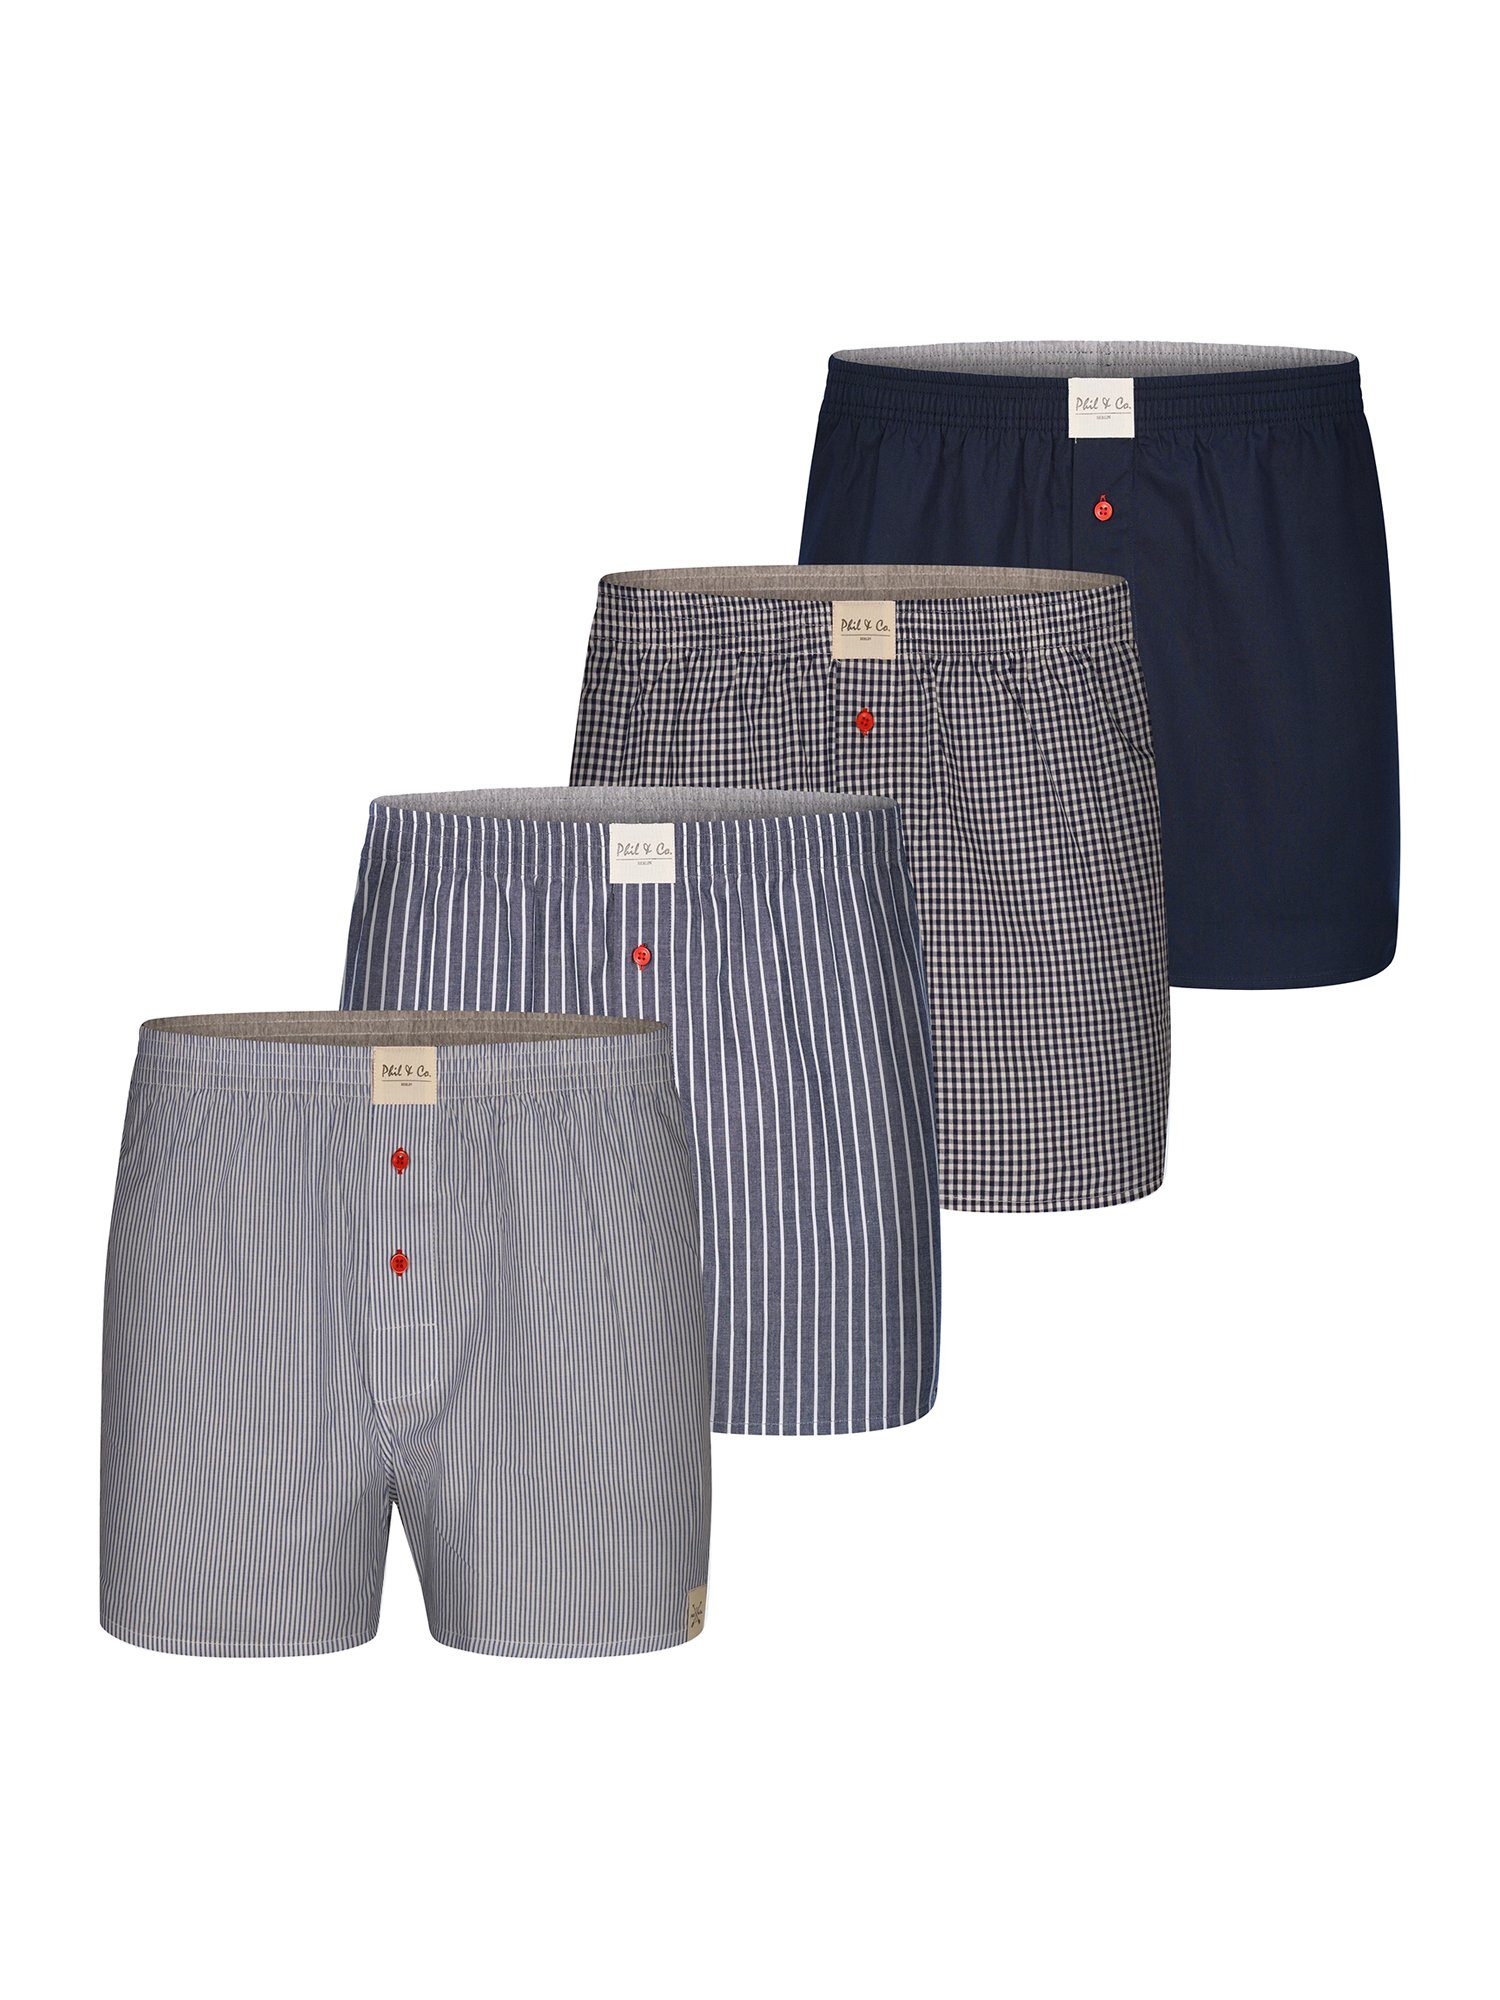 Classic (4-St) & Phil Co. grey Web cool Boxer